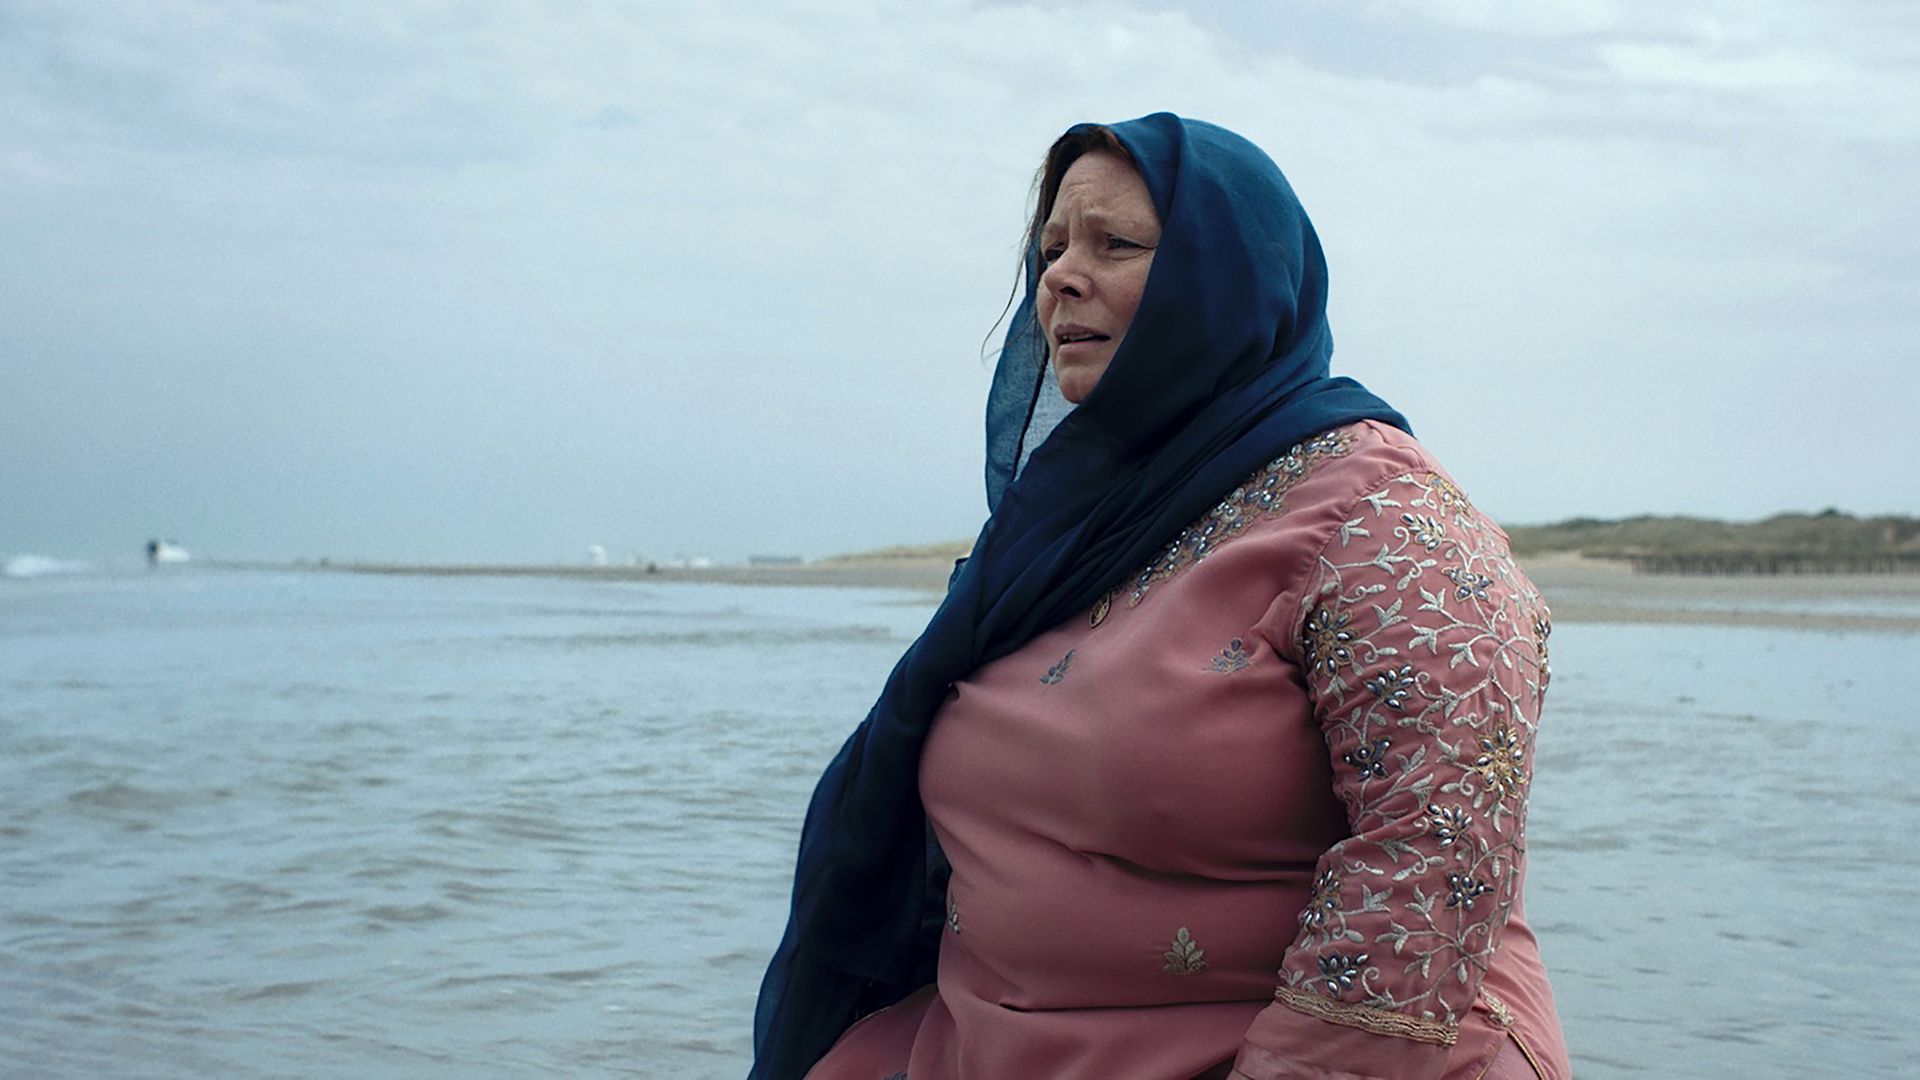 Joanna Scanlan as Mary in After Love, a BFI Distribution release - Credit: BFI Distribution